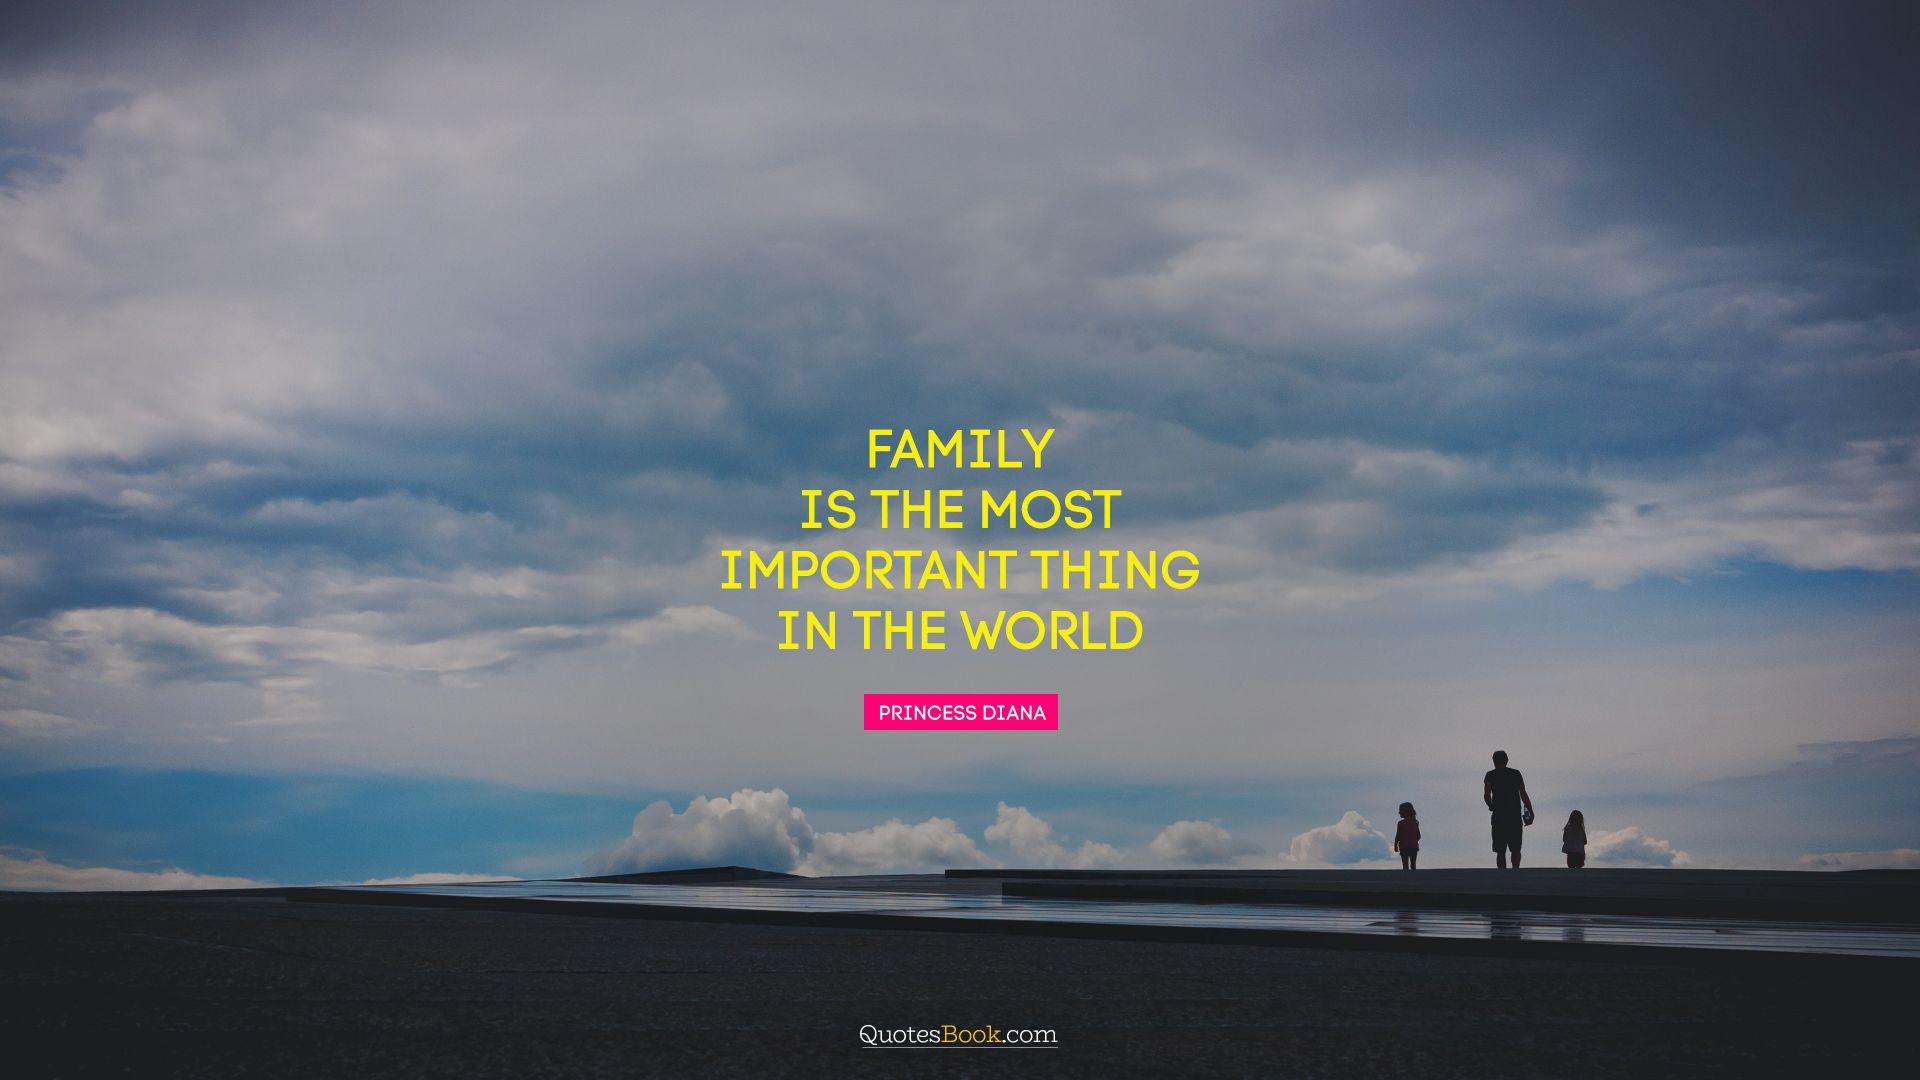 Family is the most important thing in the world. - Quote by Princess Diana